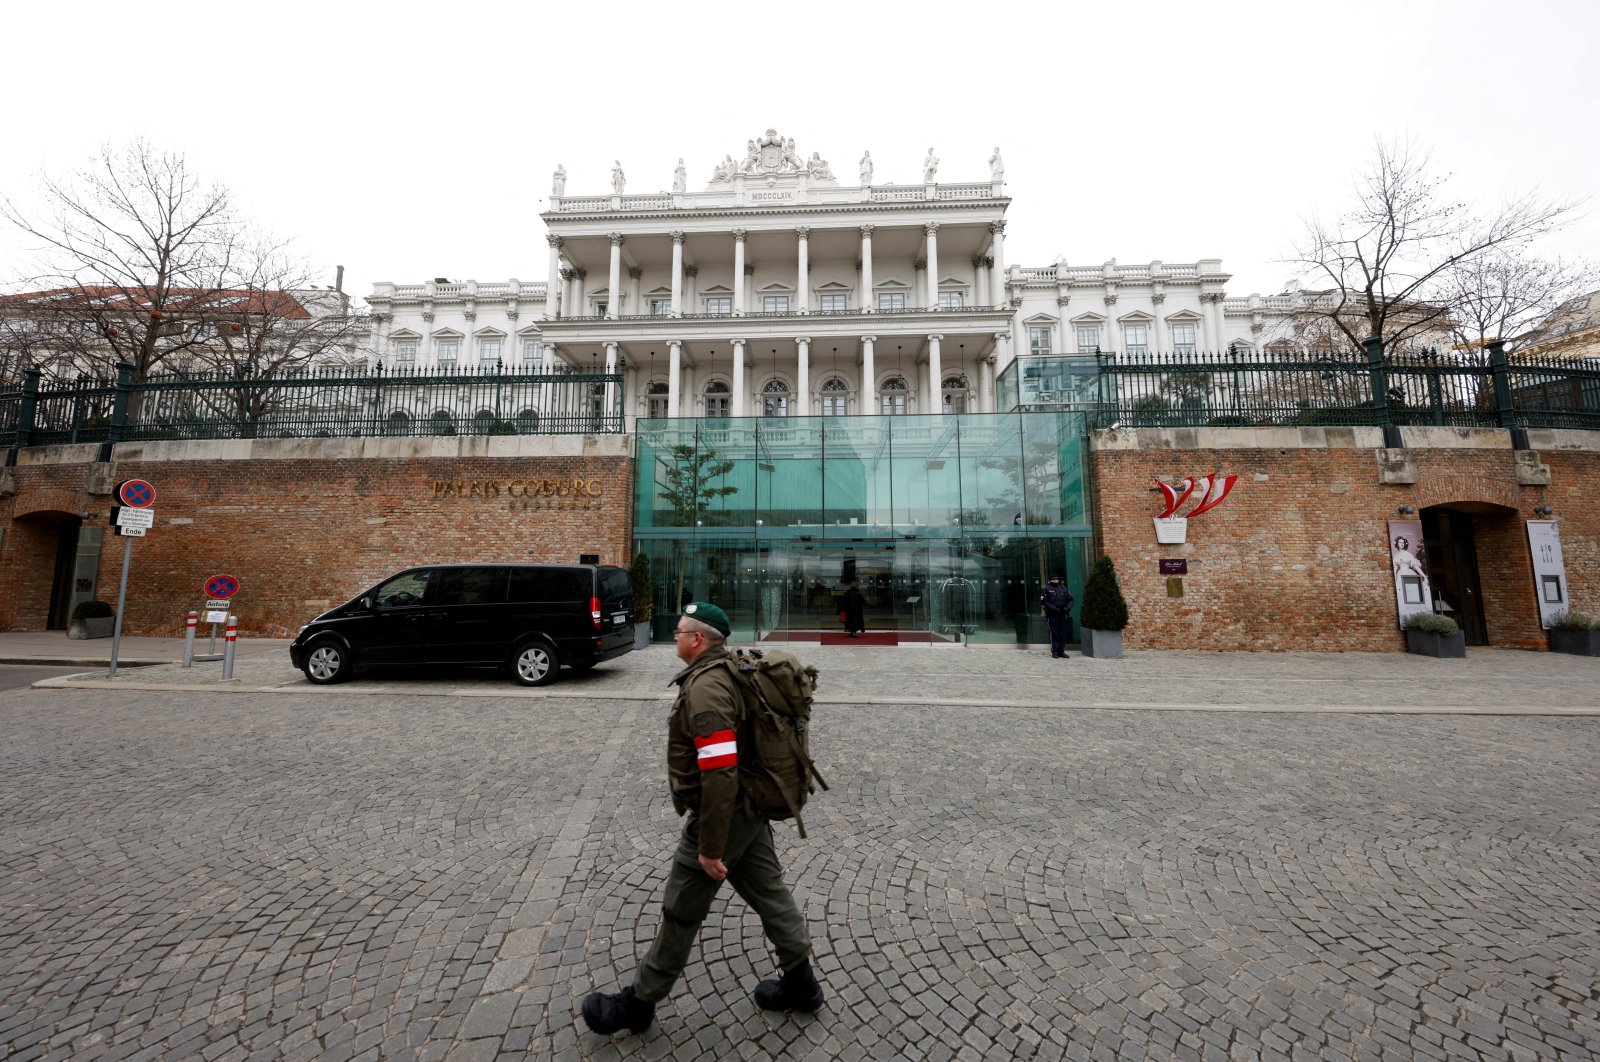 A member of the Austrian armed forces walks past Palais Coburg, the site of a meeting of the Joint Comprehensive Plan of Action (JCPOA), Vienna, Austria, Feb. 8, 2022.  (Reuters Photo)